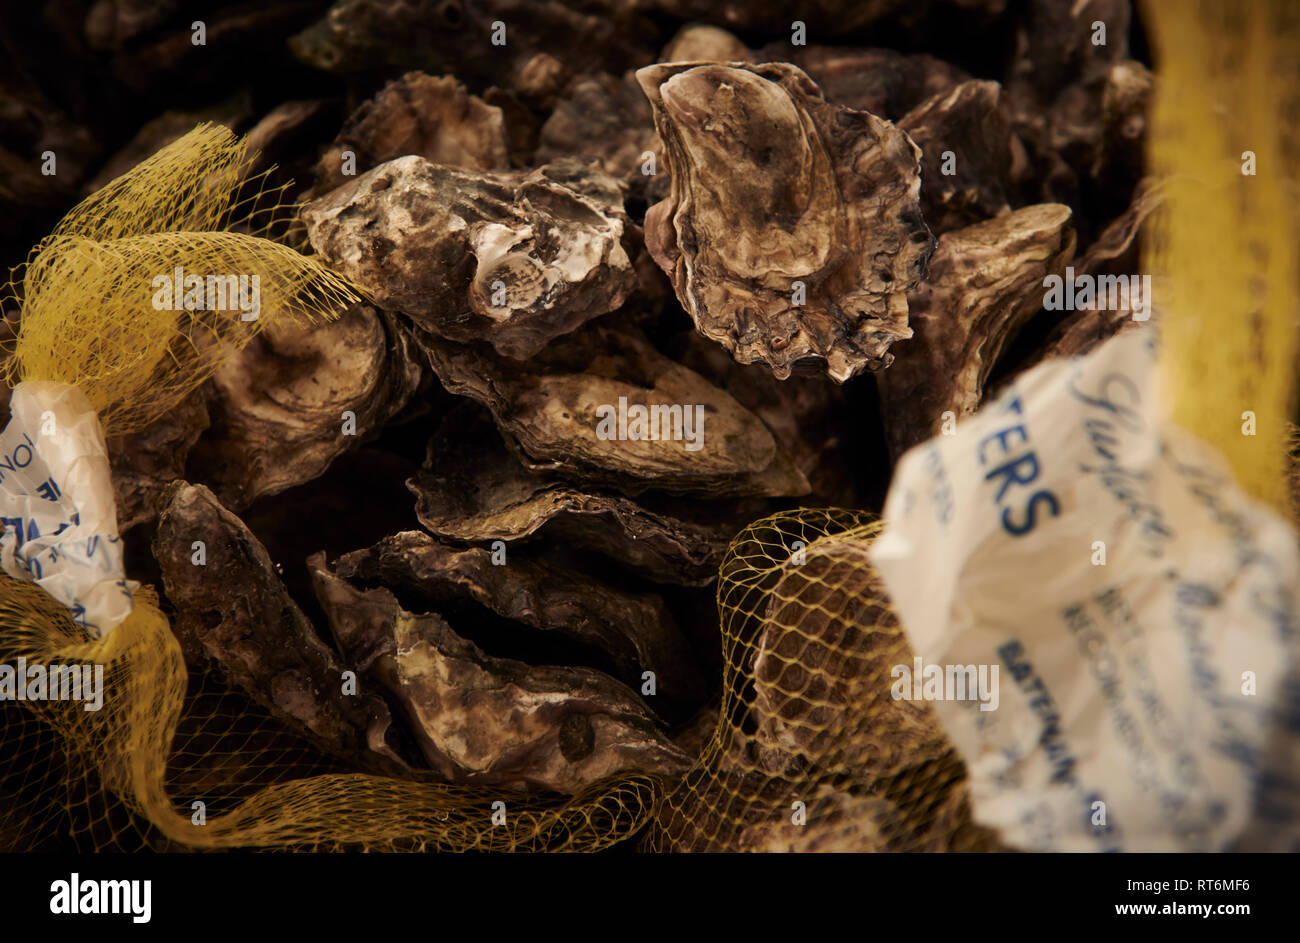 A bunch of fresh un-shucked oysters from the market in a plastic yellow mesh produce bag. Stock Photo